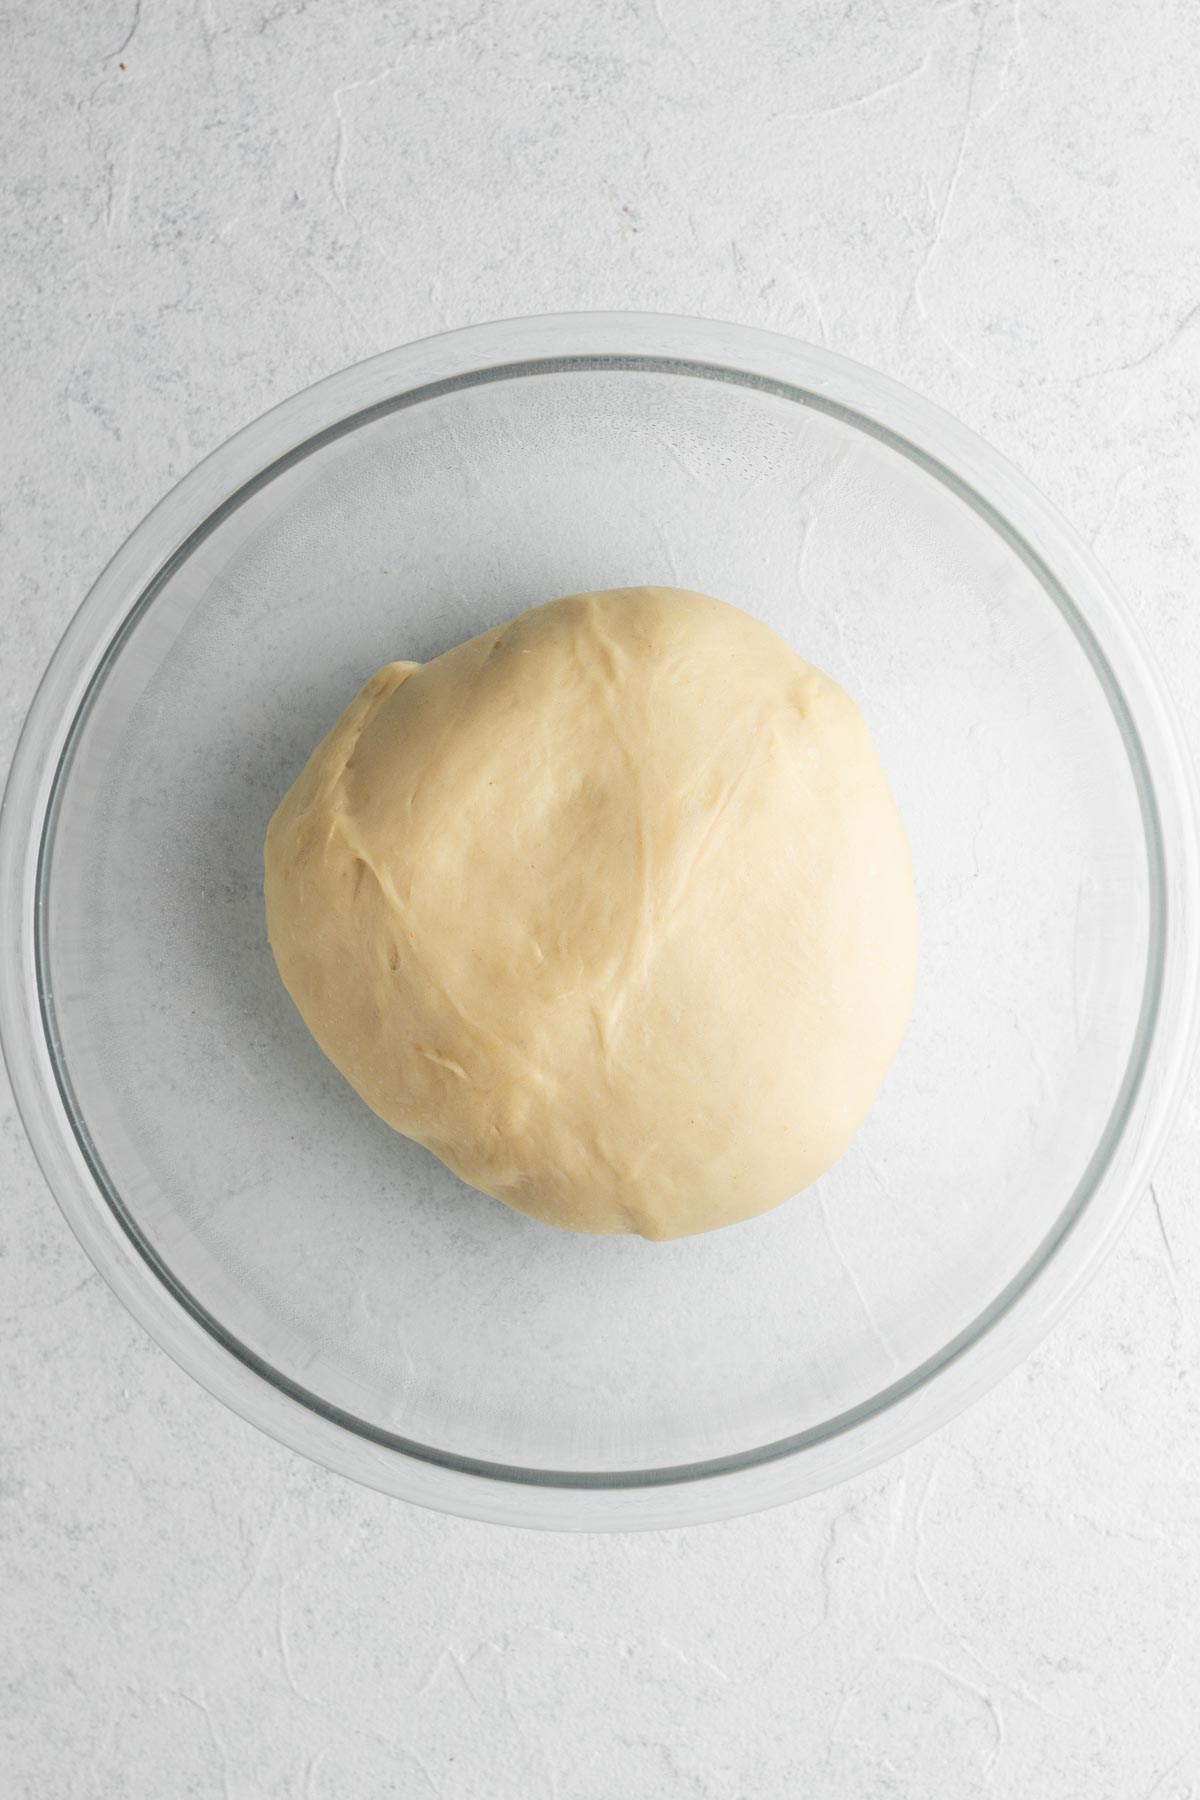 Ball of risen brioche dough in a glass mixing ball on a white surface.